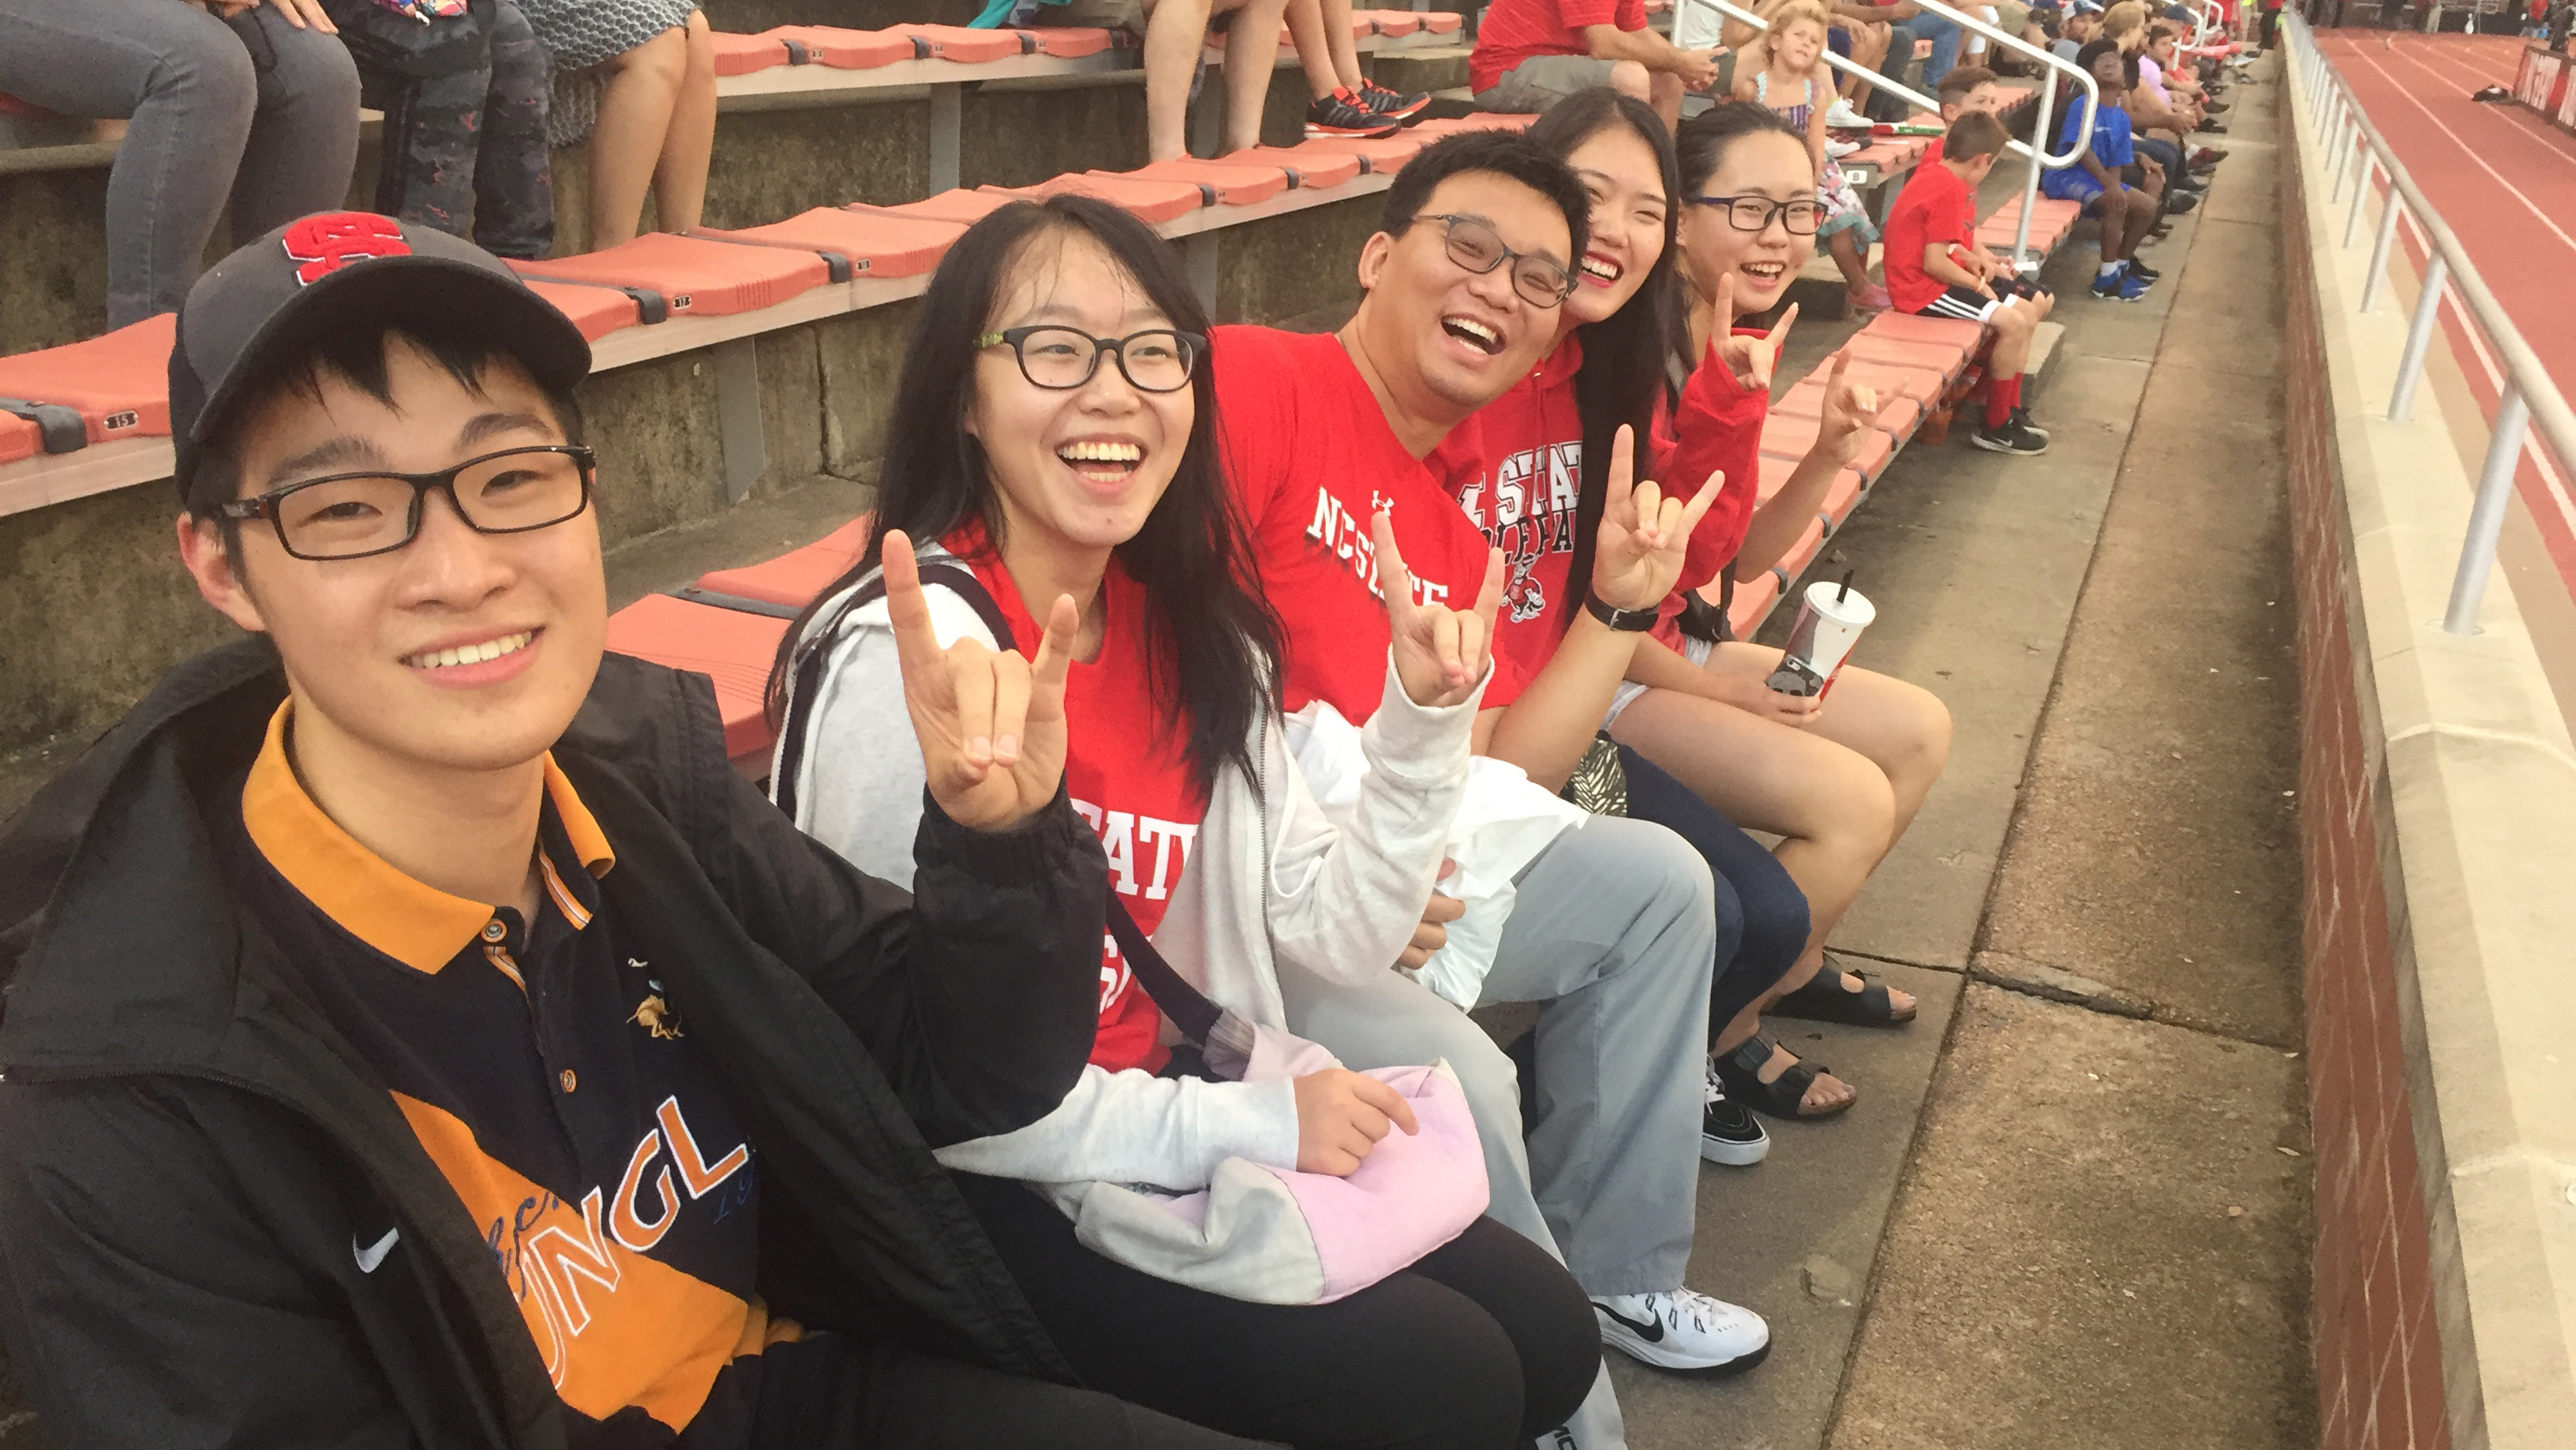 IEP students at an NC State soccer game.